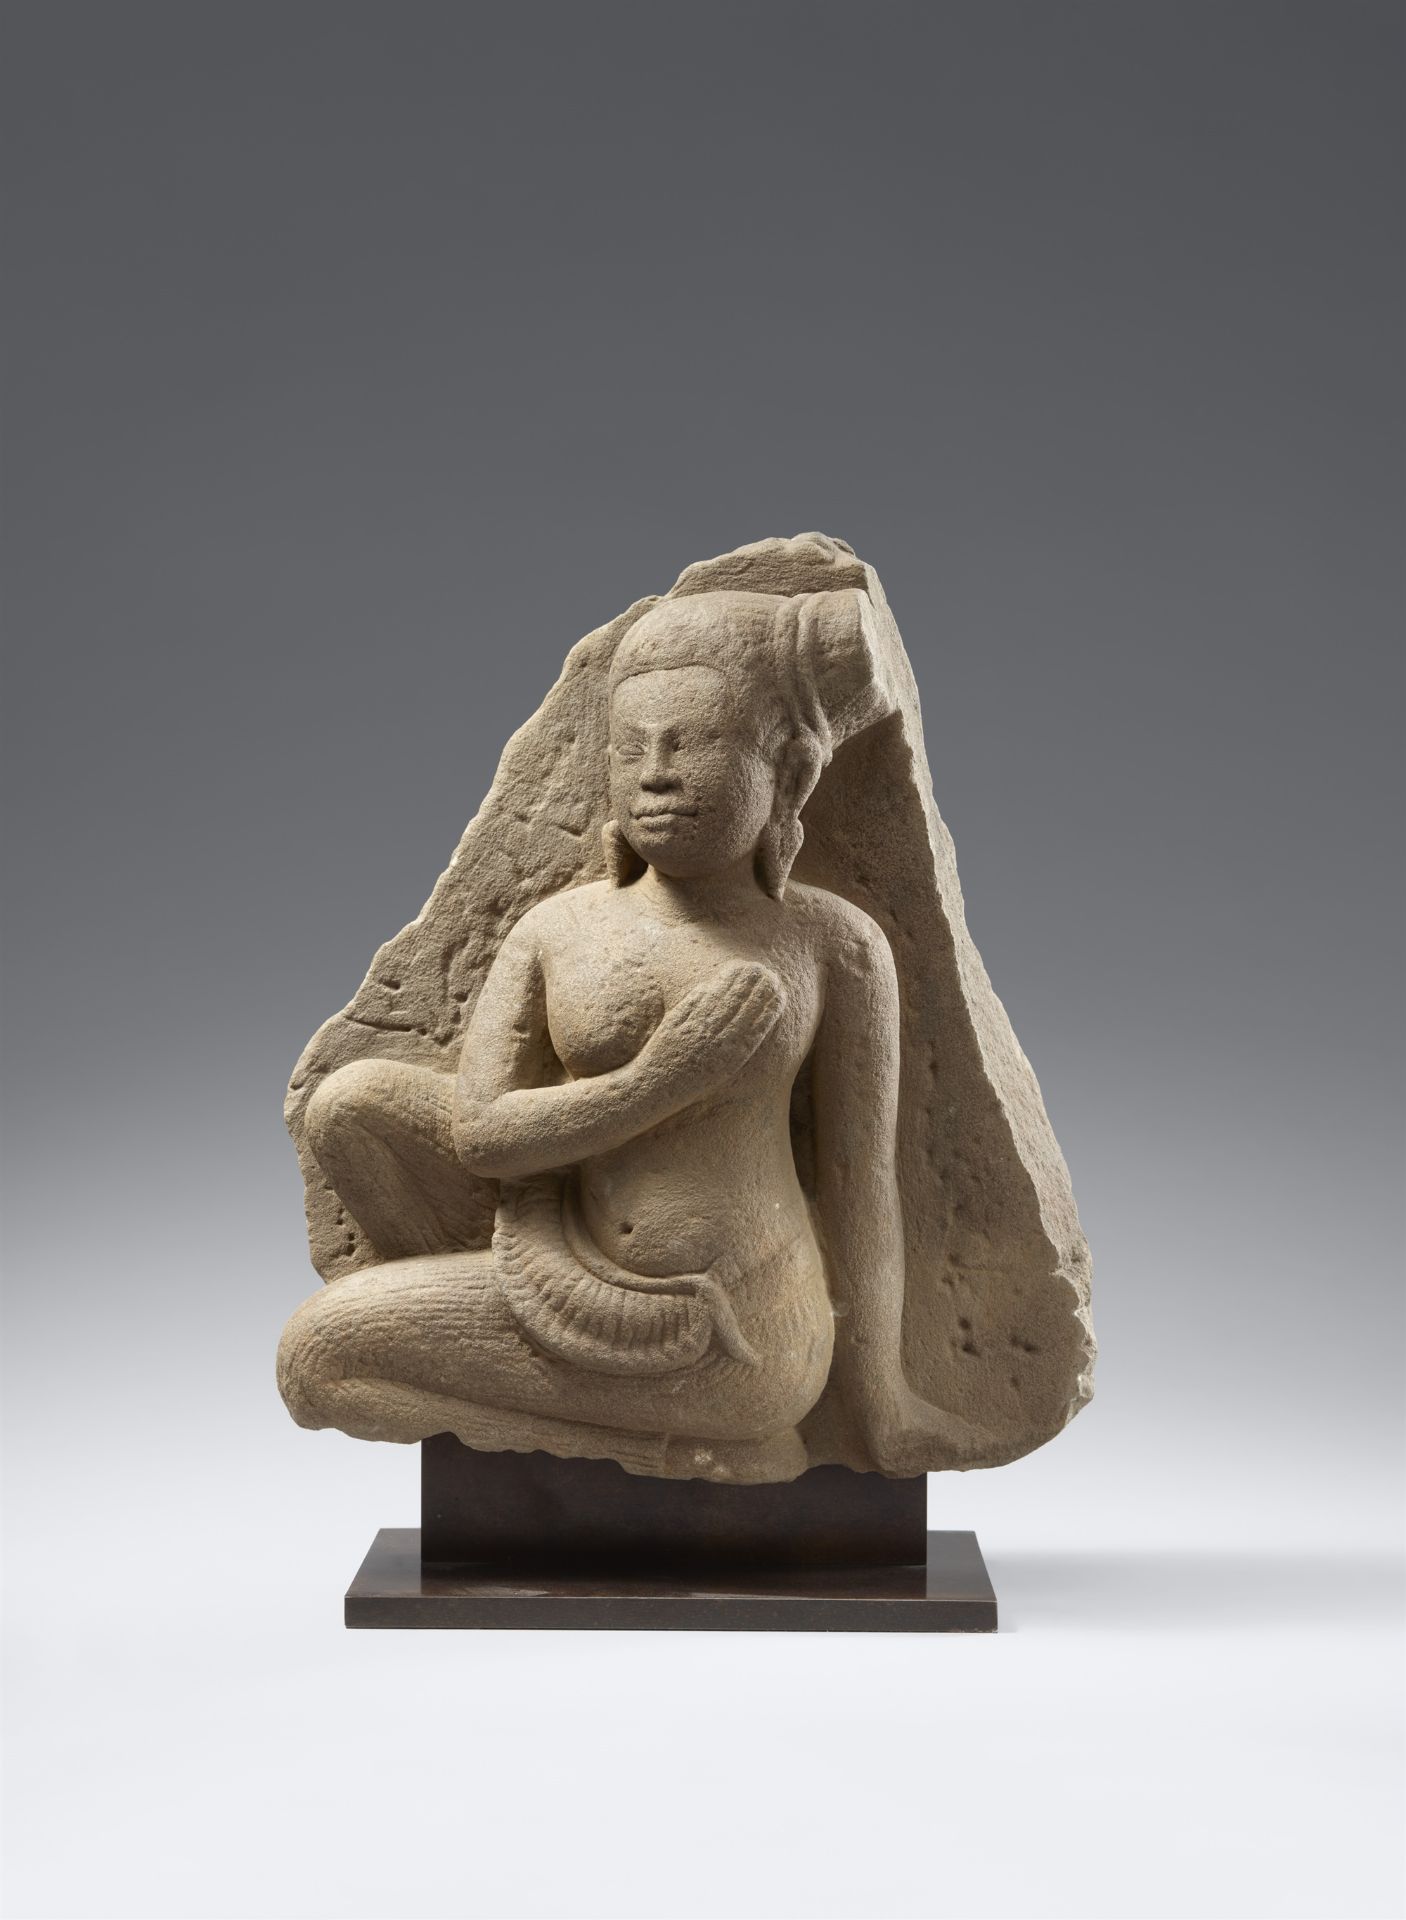 An Angkor Wat-style sandstone figure of a female attendant. Cambodia. 12th century